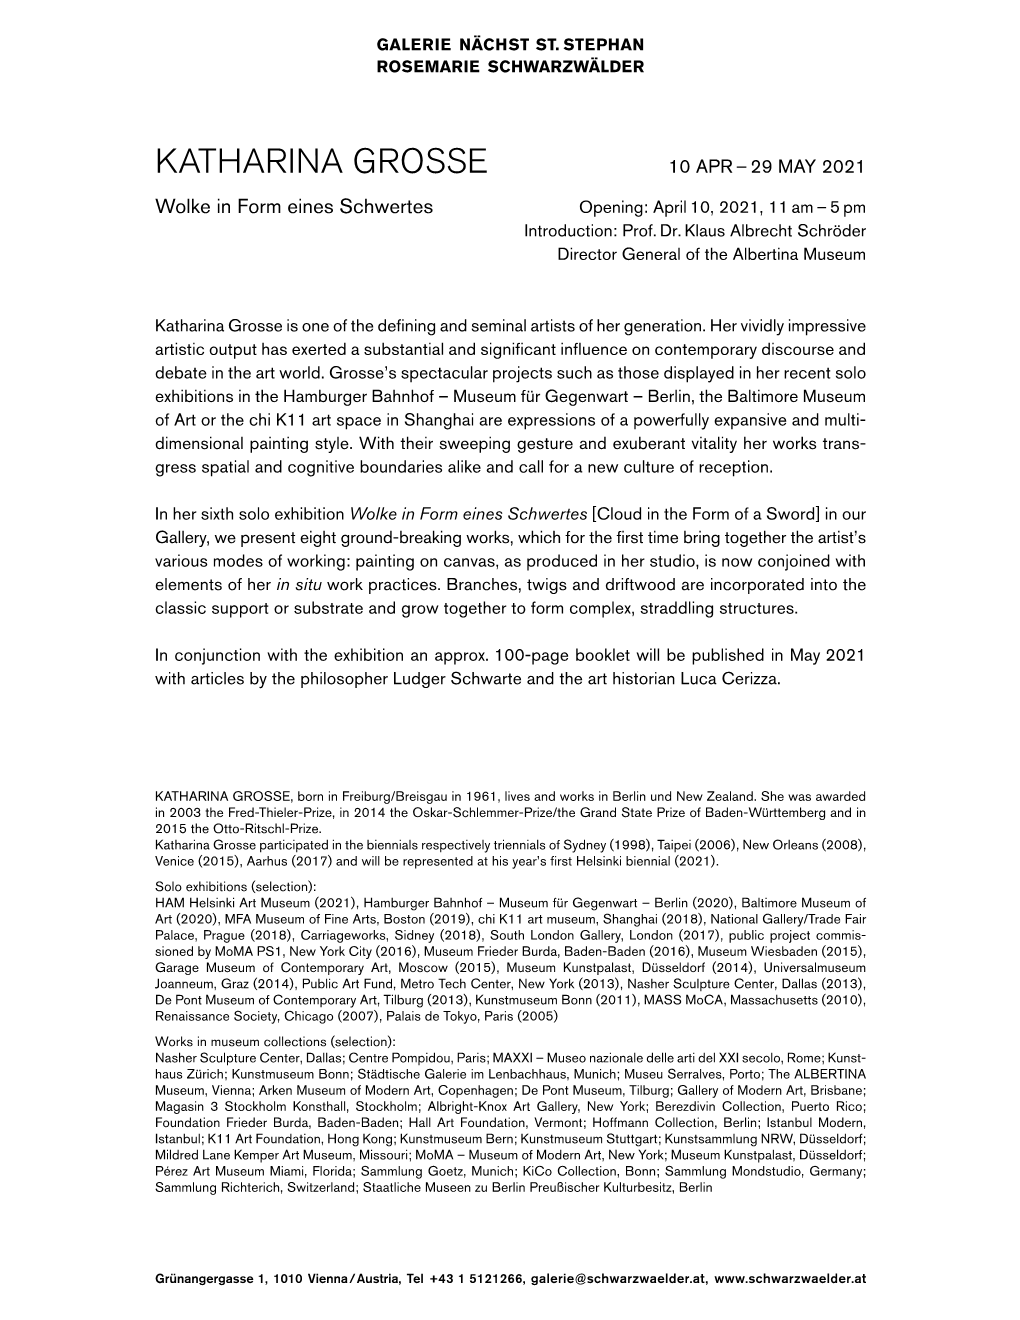 KATHARINA GROSSE 10 APR – 29 MAY 2021 Wolke in Form Eines Schwertes Opening: April 10, 2021, 11 Am – 5 Pm Introduction: Prof